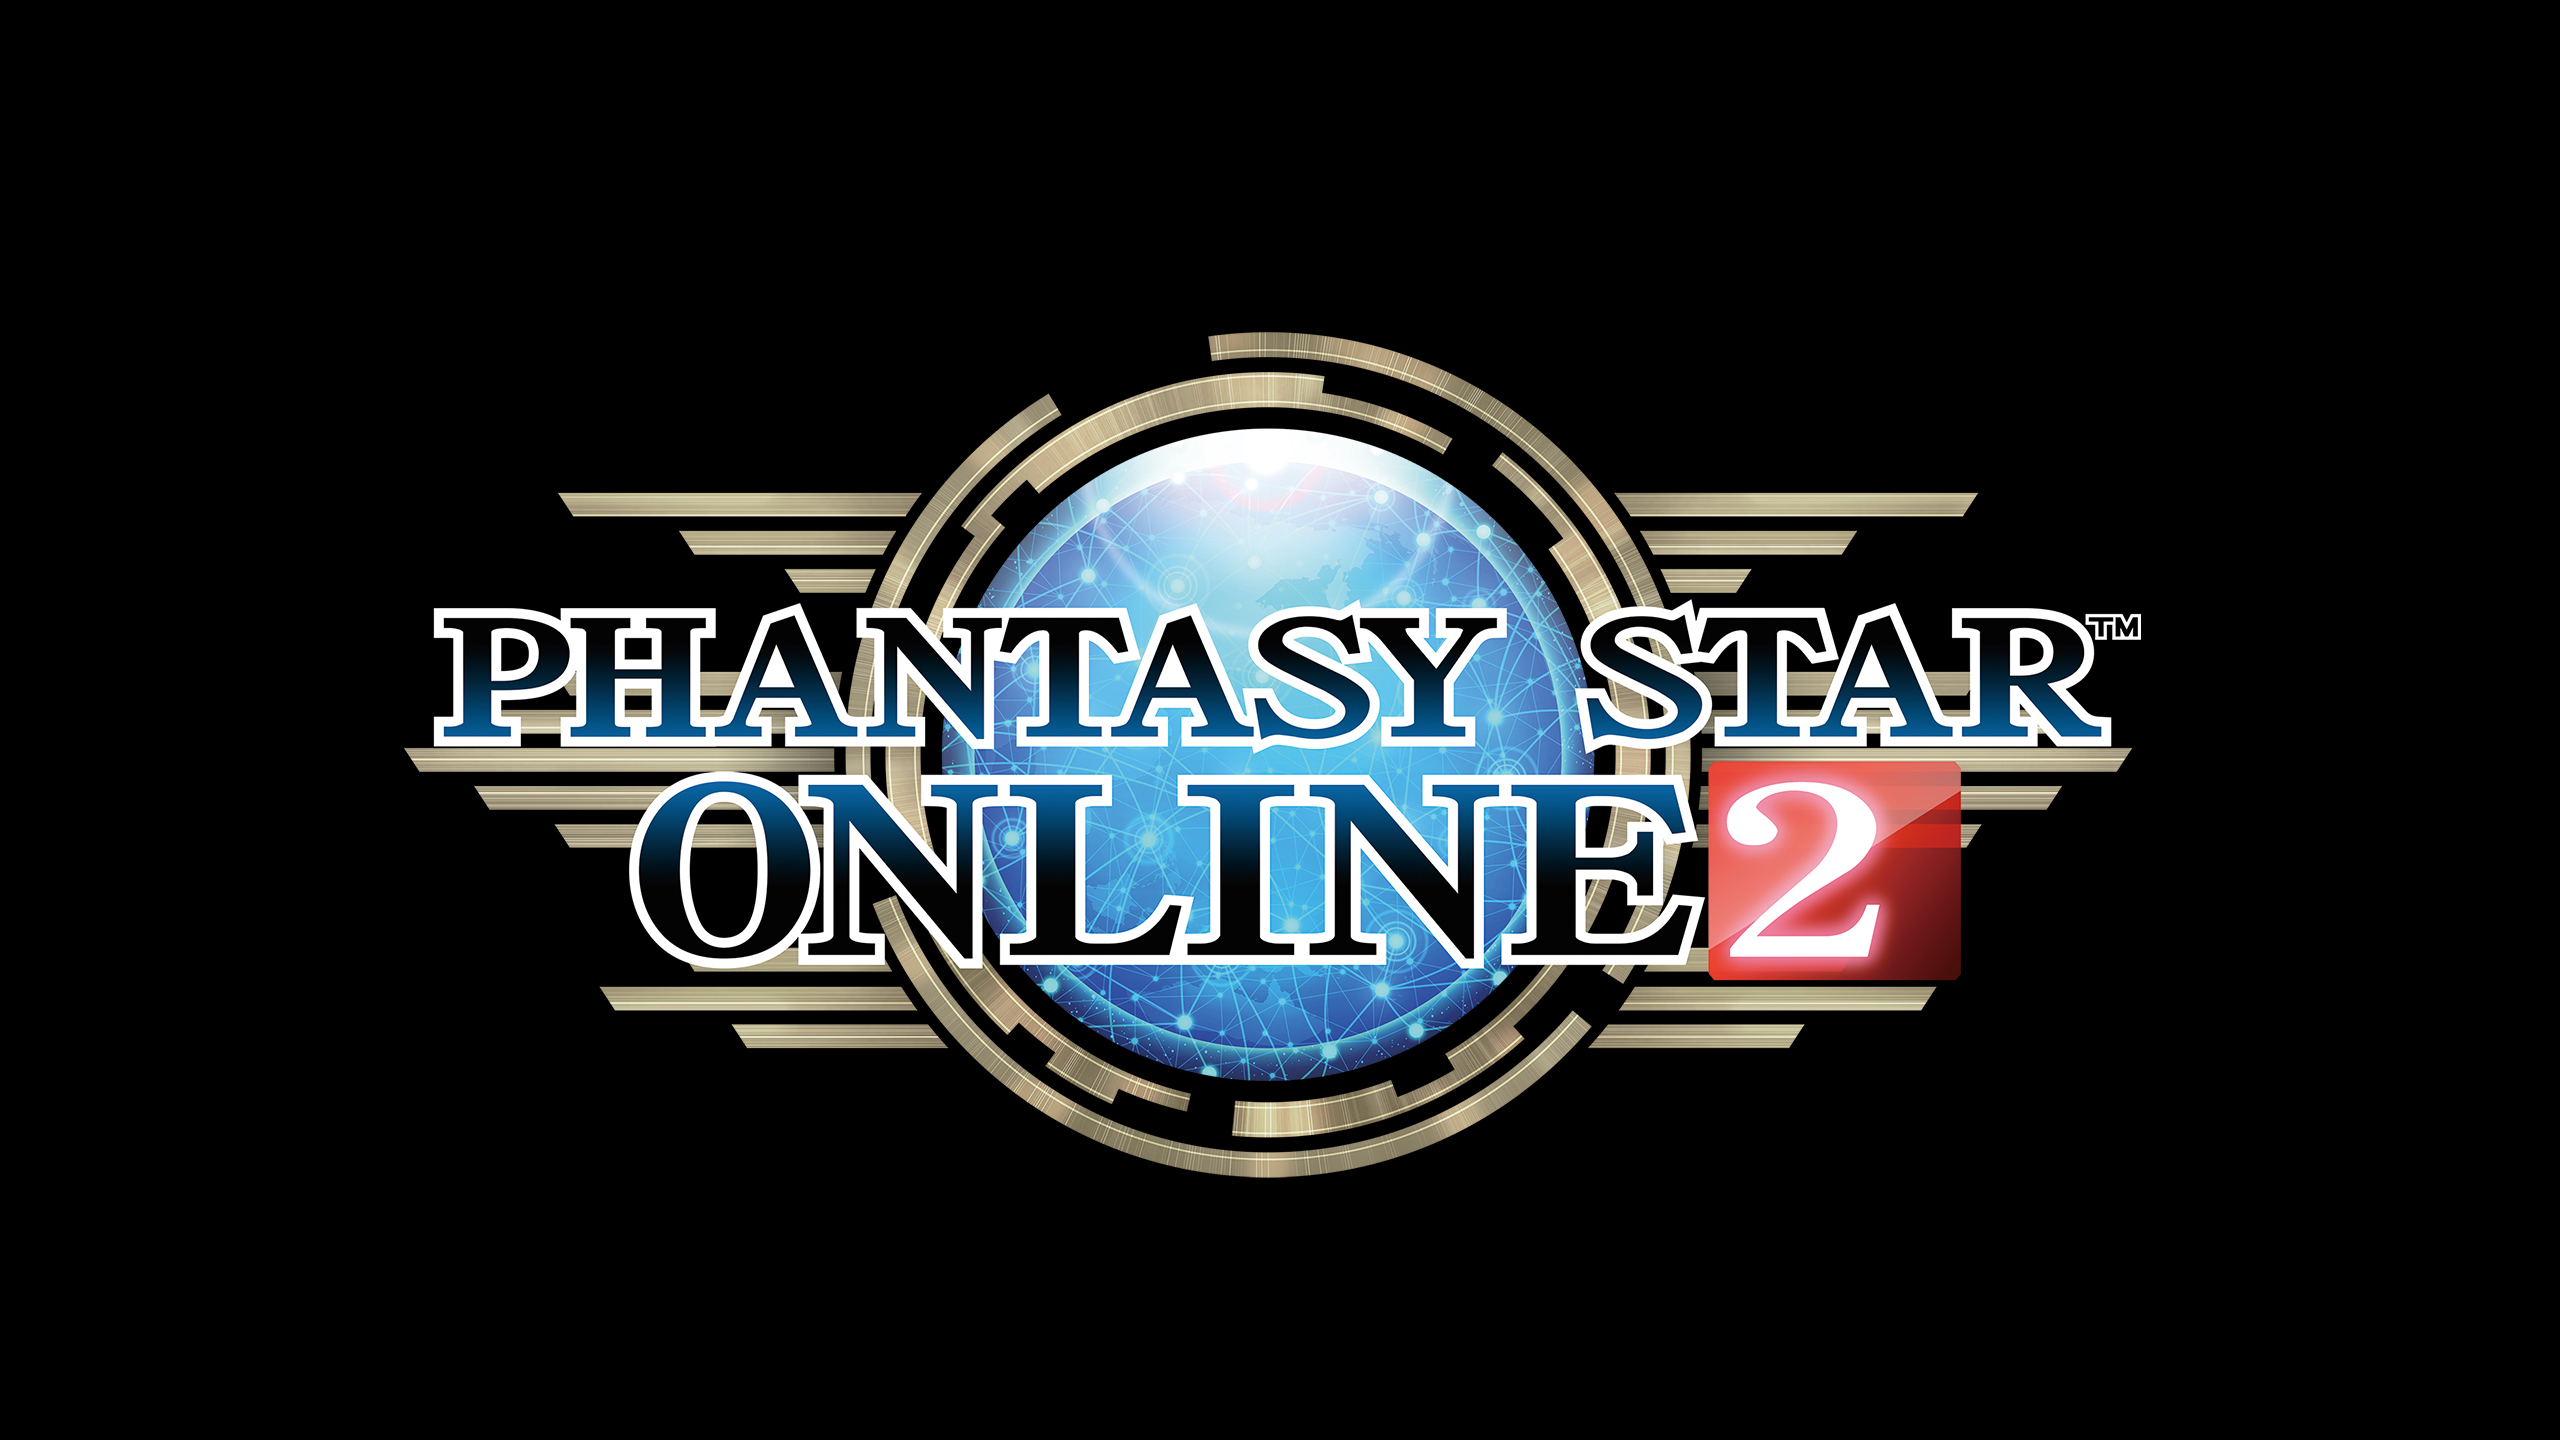 Sign Up for the Phantasy Star Online 2 Closed Beta Test Now 